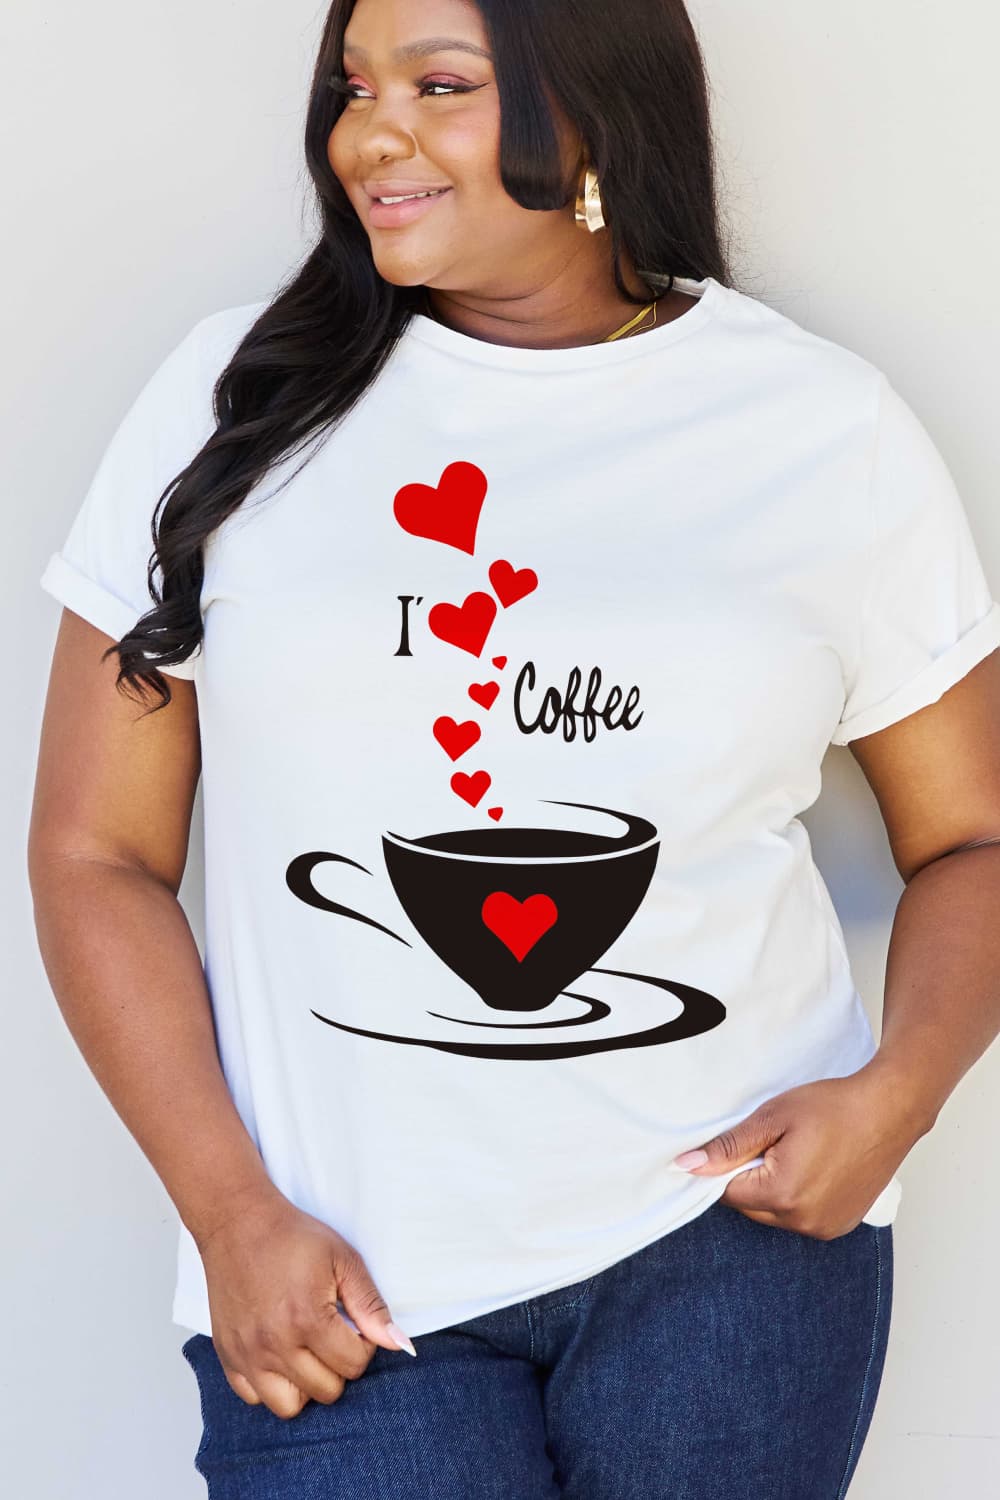 Trendsi Simply Love Full Size I LOVE COFFEE Graphic Cotton Tee